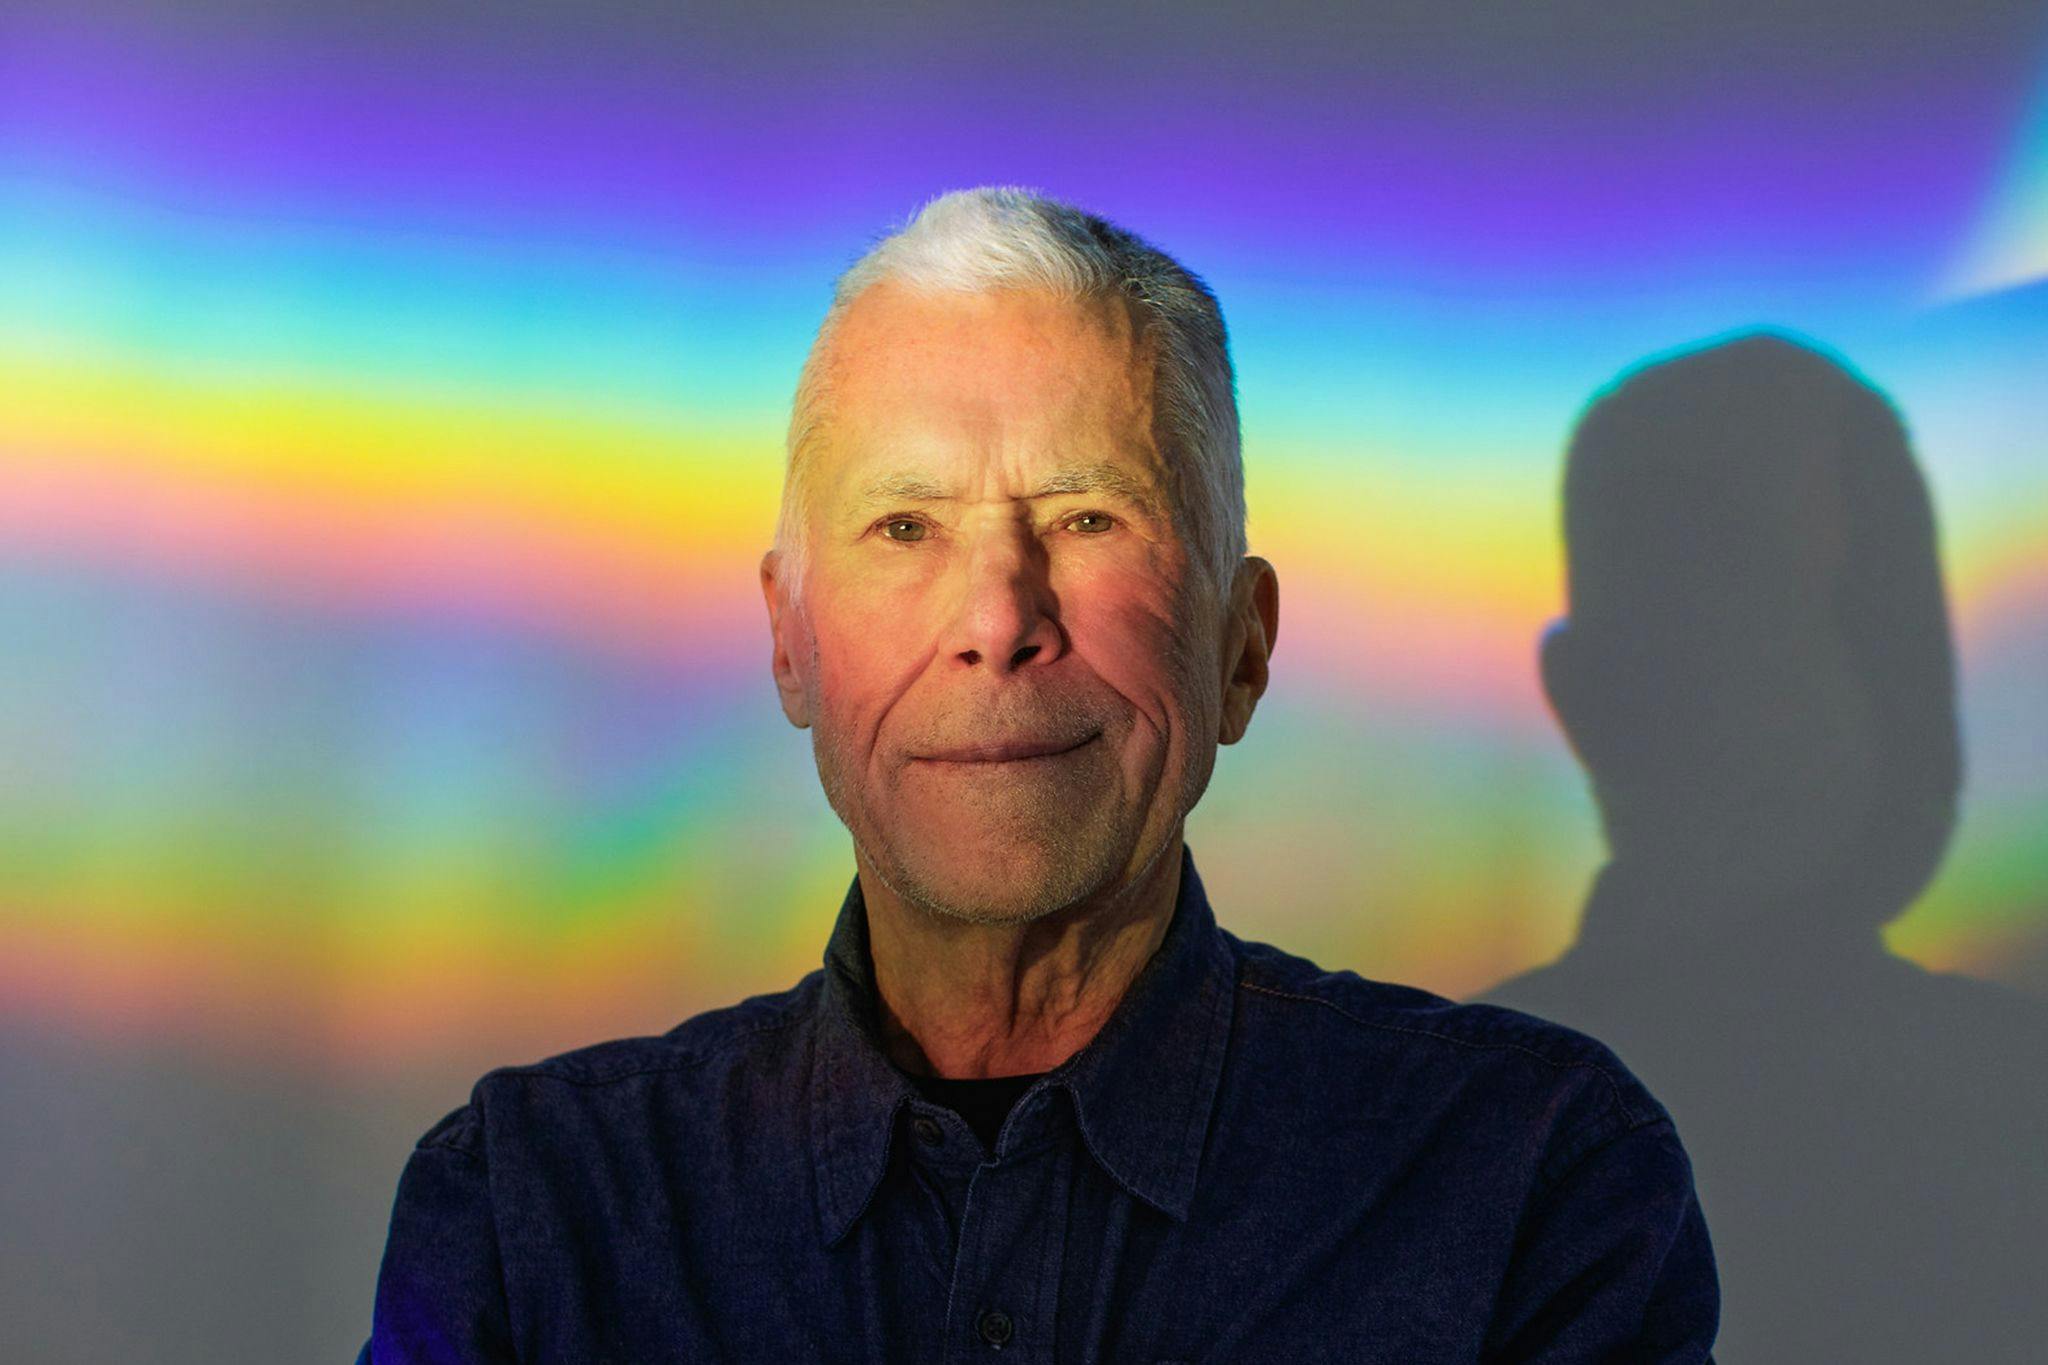 Charles Ross stands against a blank wall, with a spectrum of light casting over his face and the wall behind him.